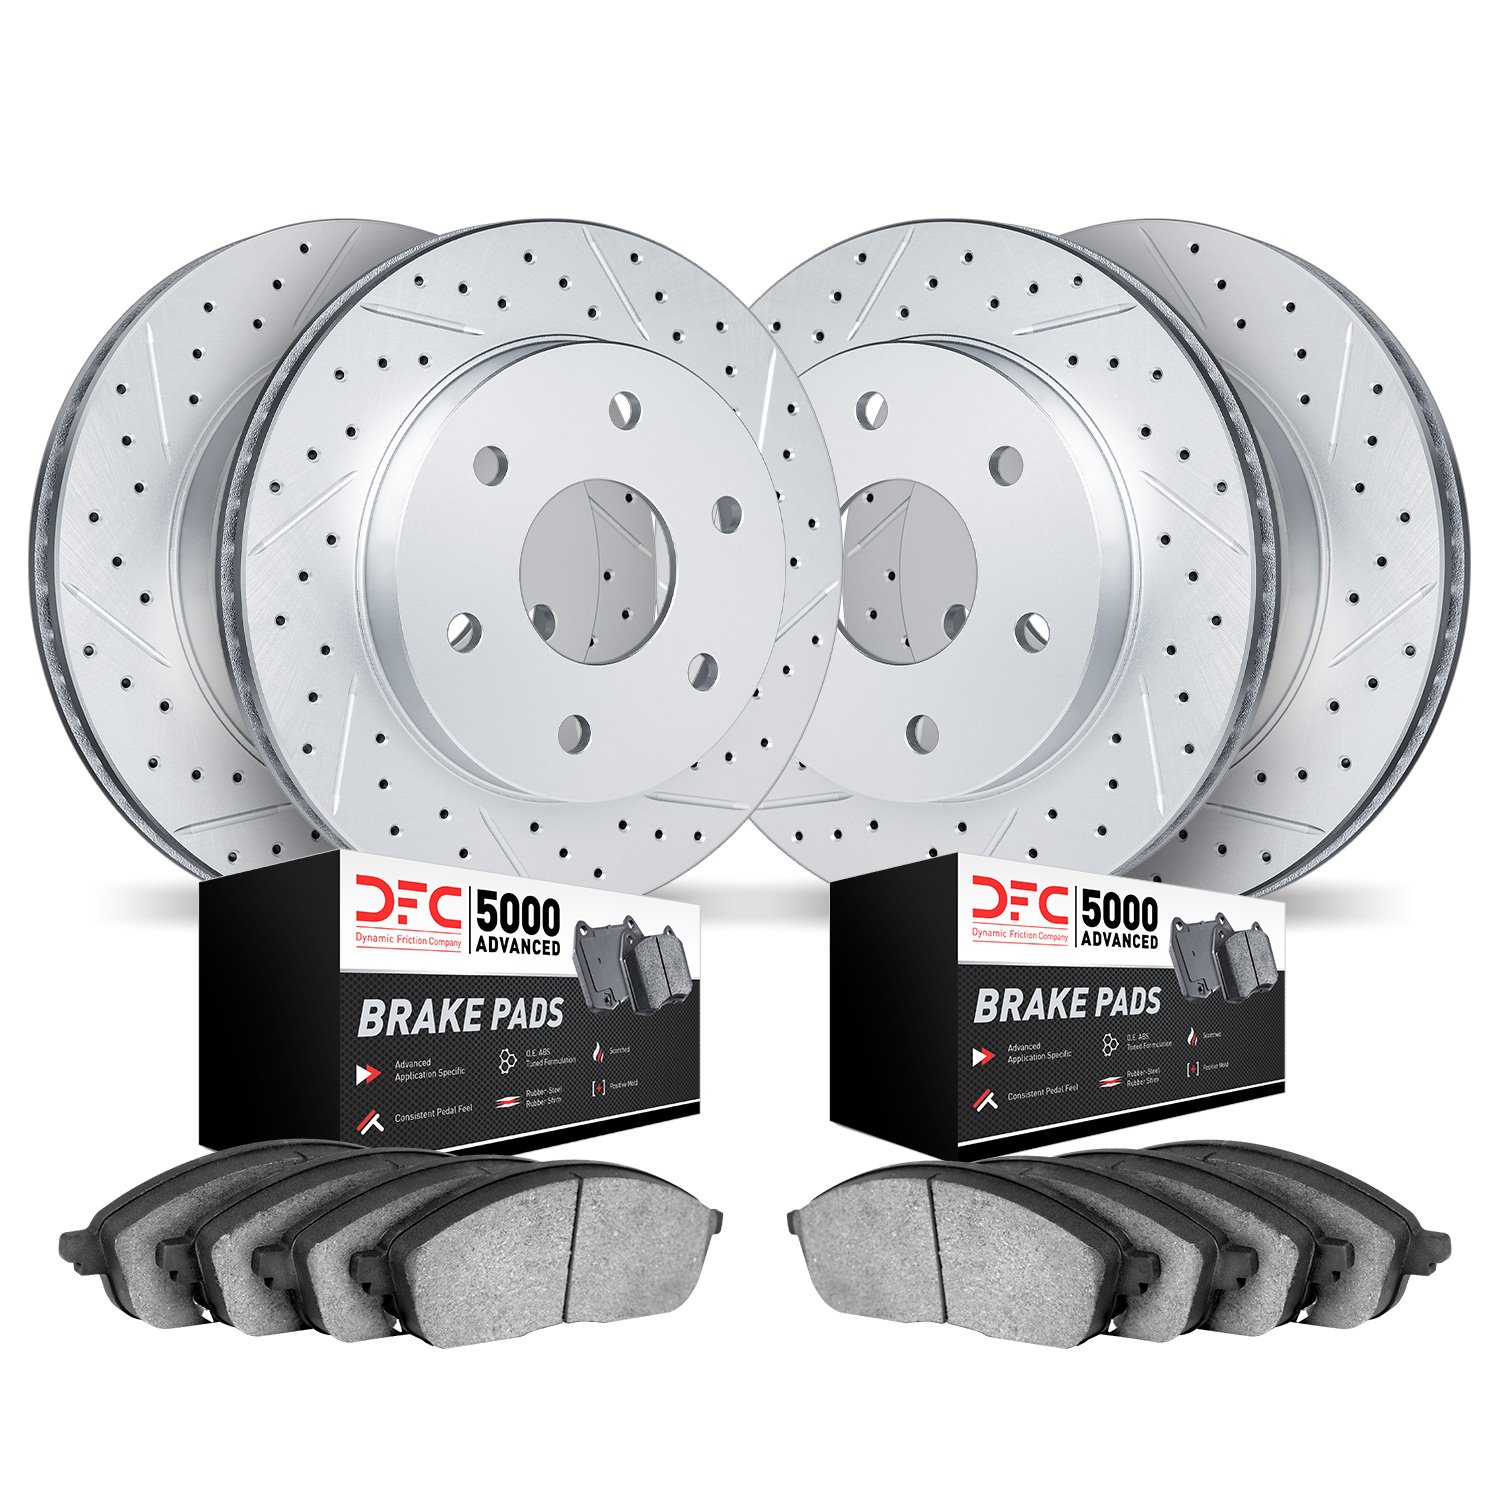 2504-54291 Geoperformance Drilled/Slotted Rotors w/5000 Advanced Brake Pads Kit, 2018-2021 Ford/Lincoln/Mercury/Mazda, Position: